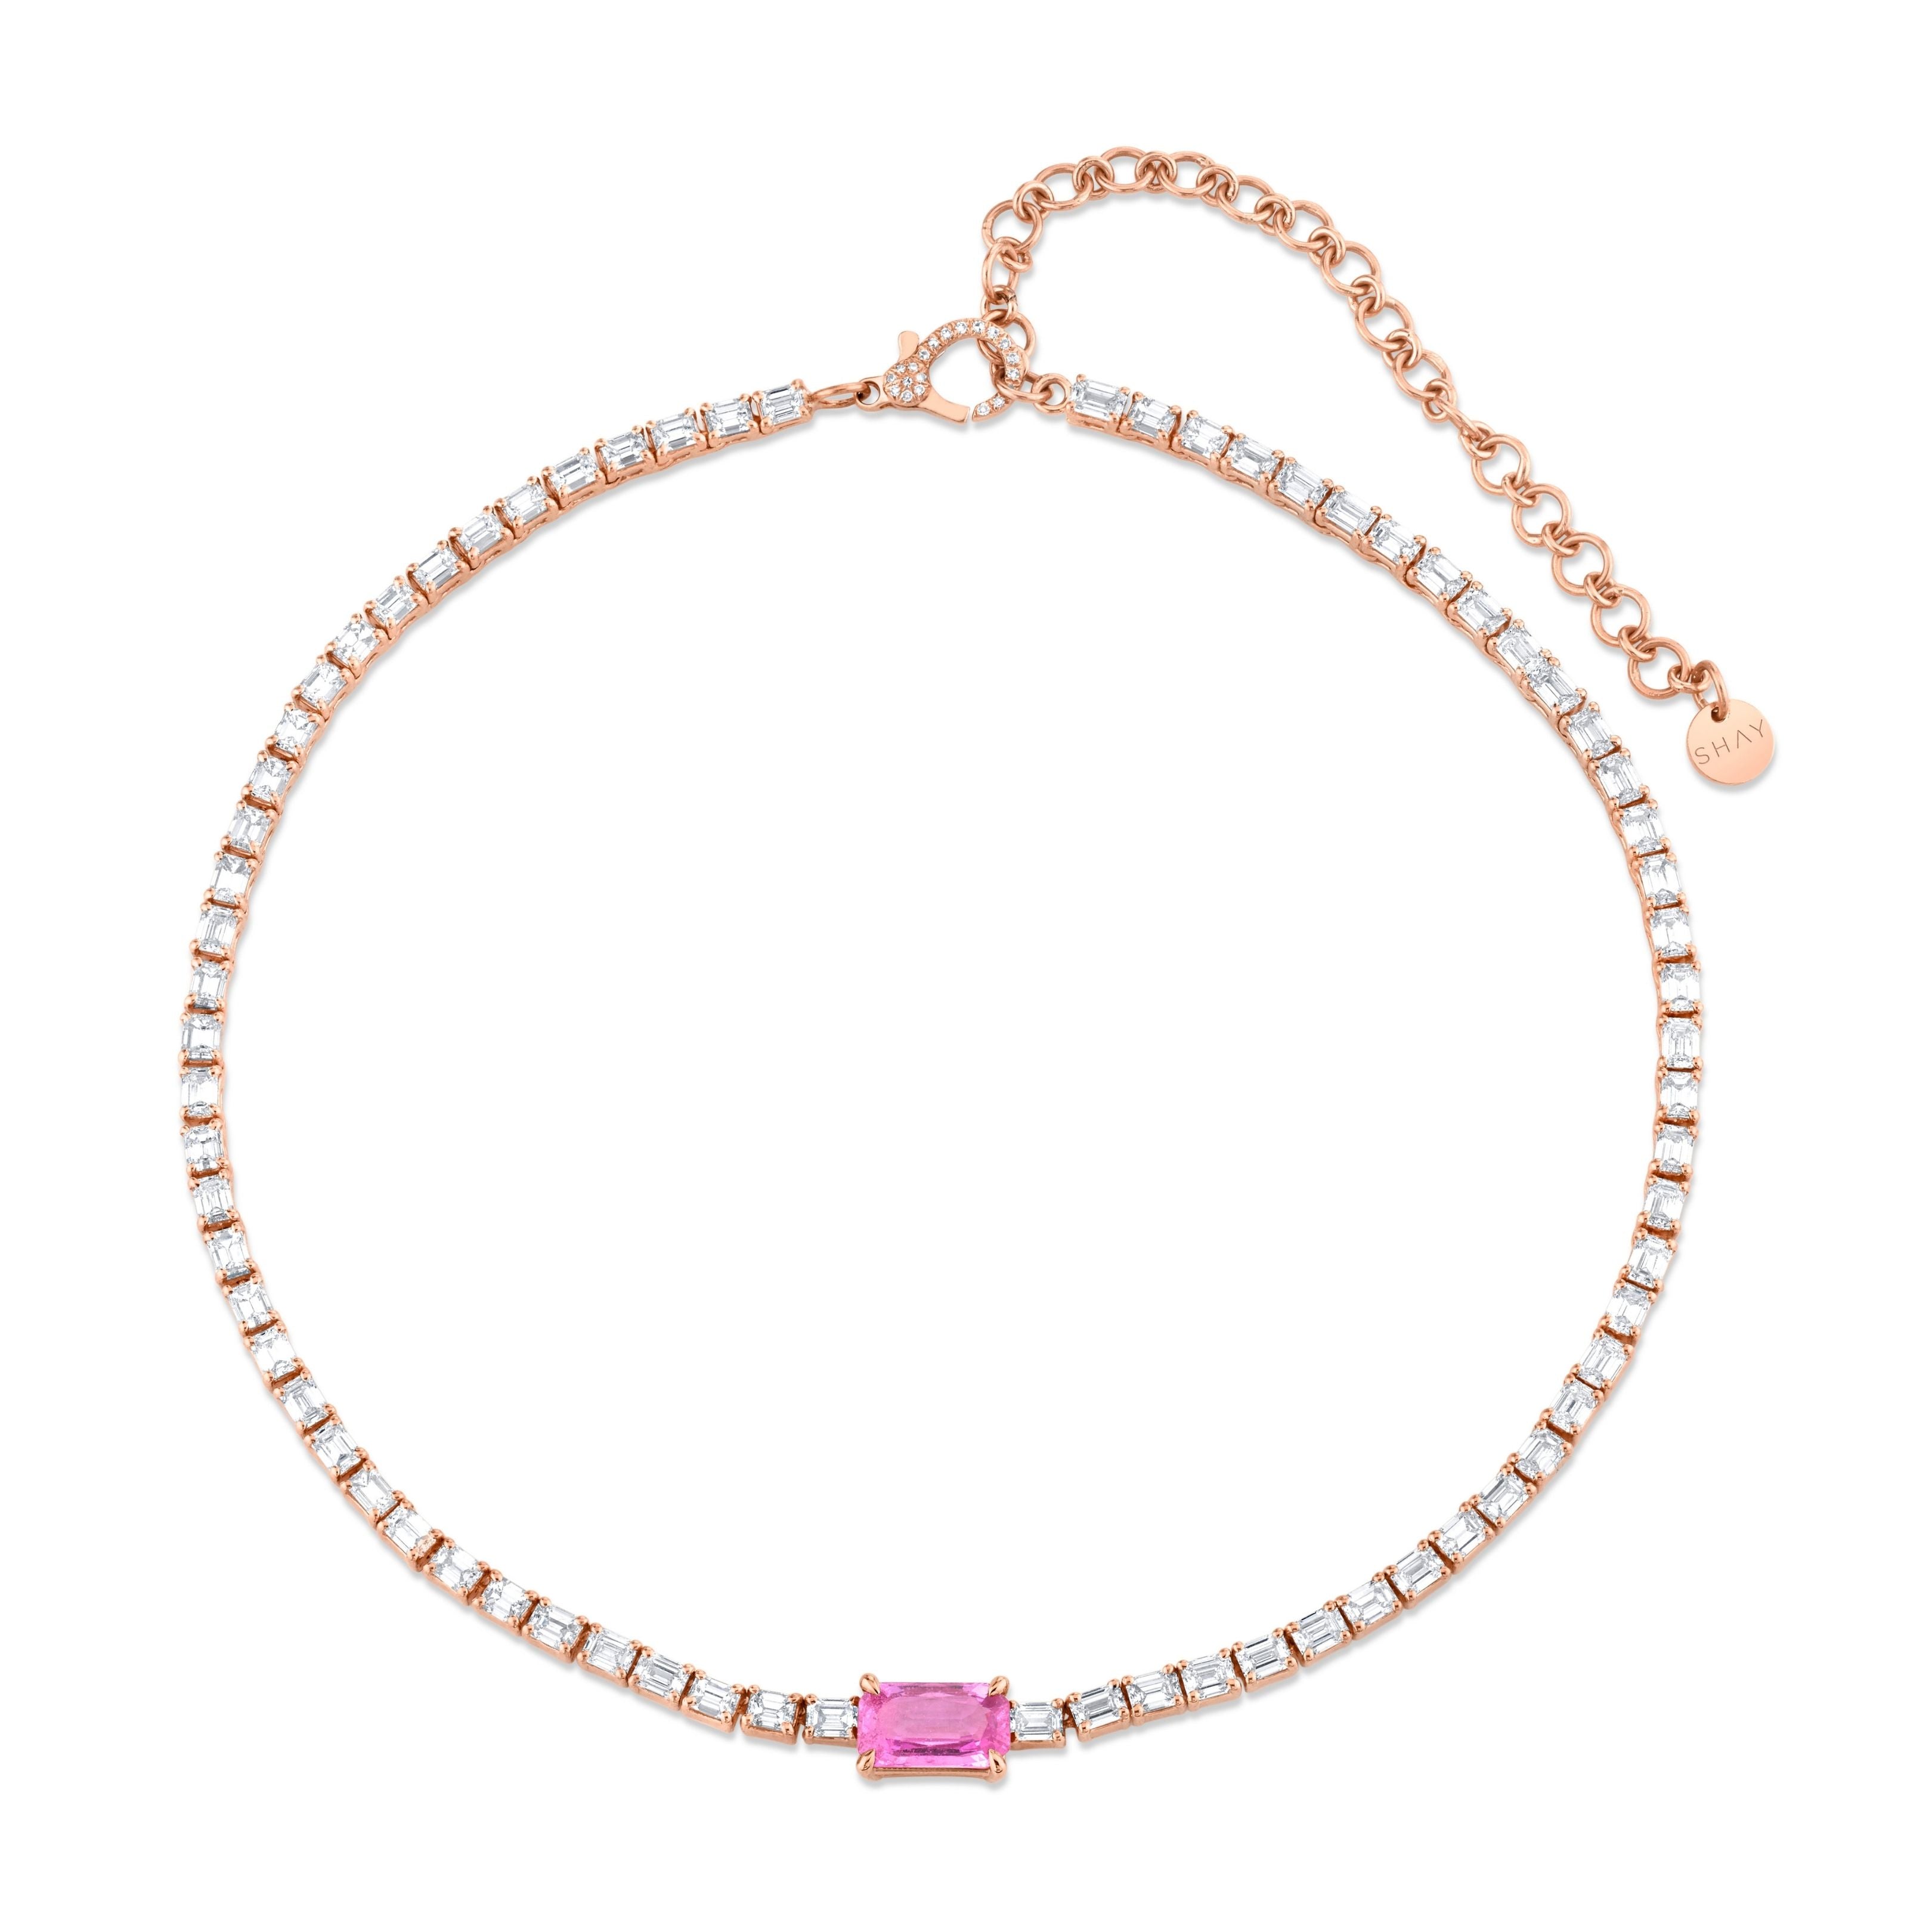 ROSE CRYSTAL TENNIS NECKLACE – HRH COLLECTION